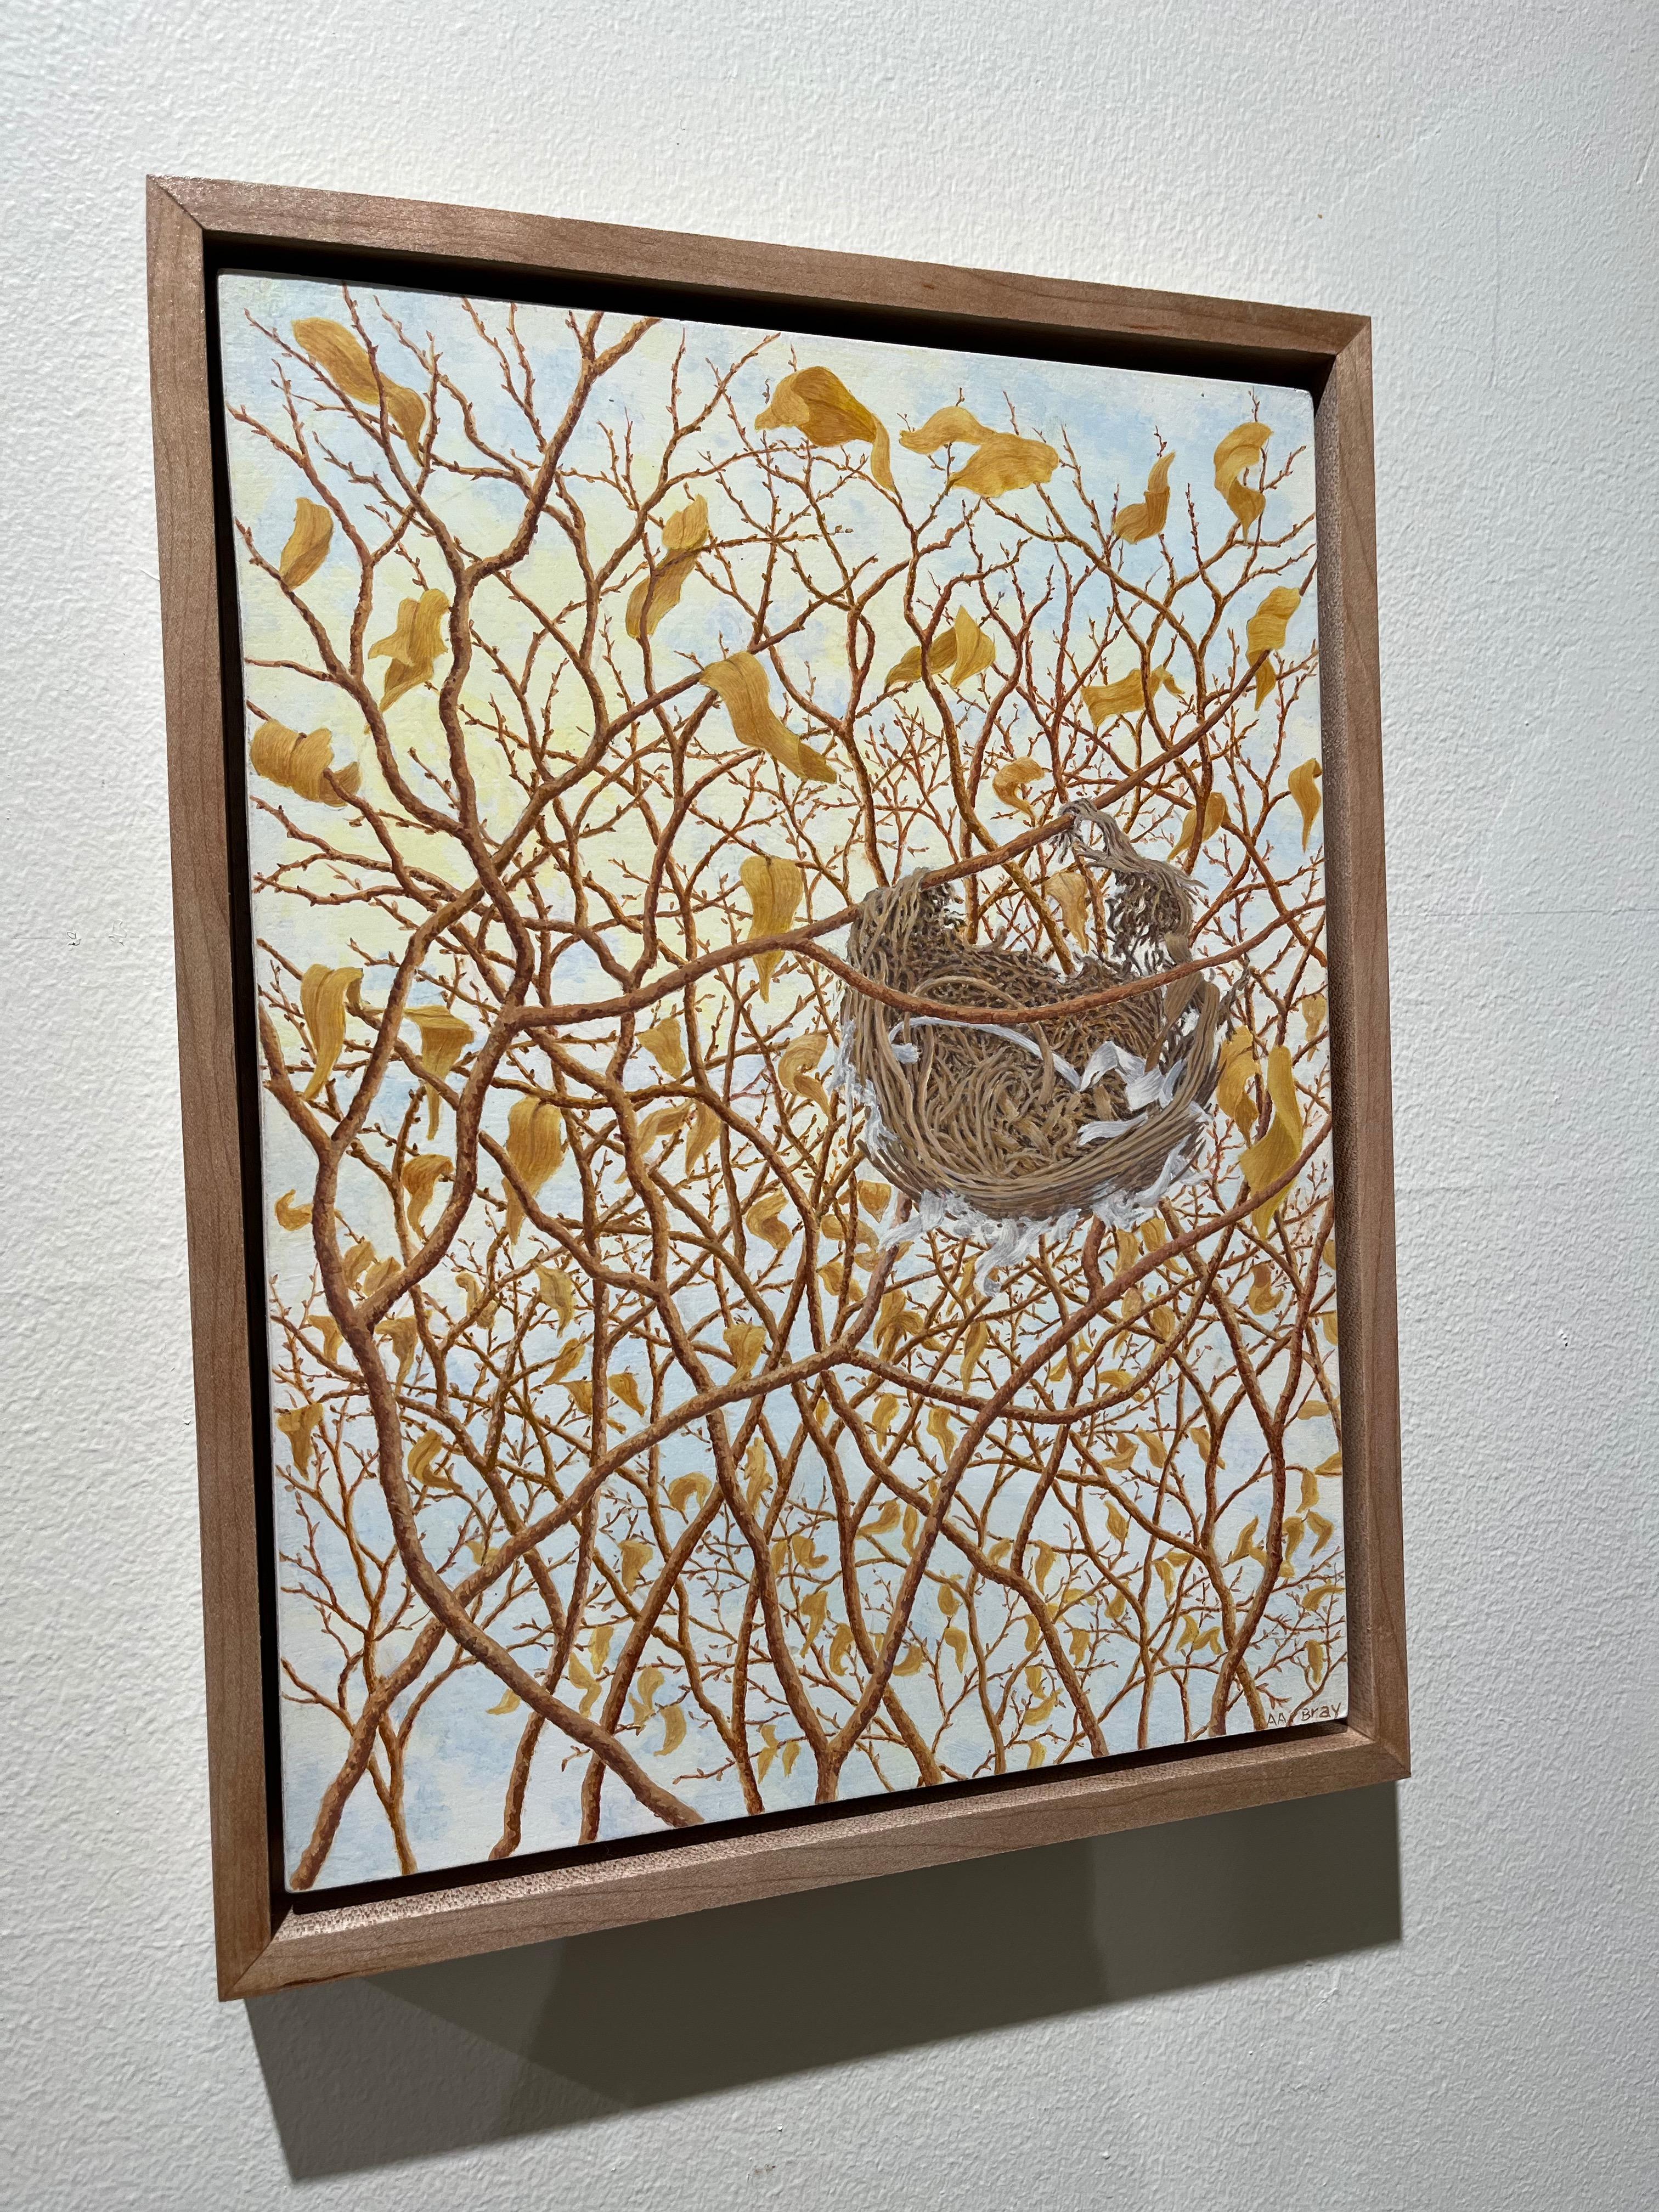 The latest painting from Alan Bray is a rare and exotic sighting, indeed. He’s shifted his focus away from the human realm and up to the skies, capturing an empty bird’s nest camouflaged amongst branches and broken waves. Though not so clandestine